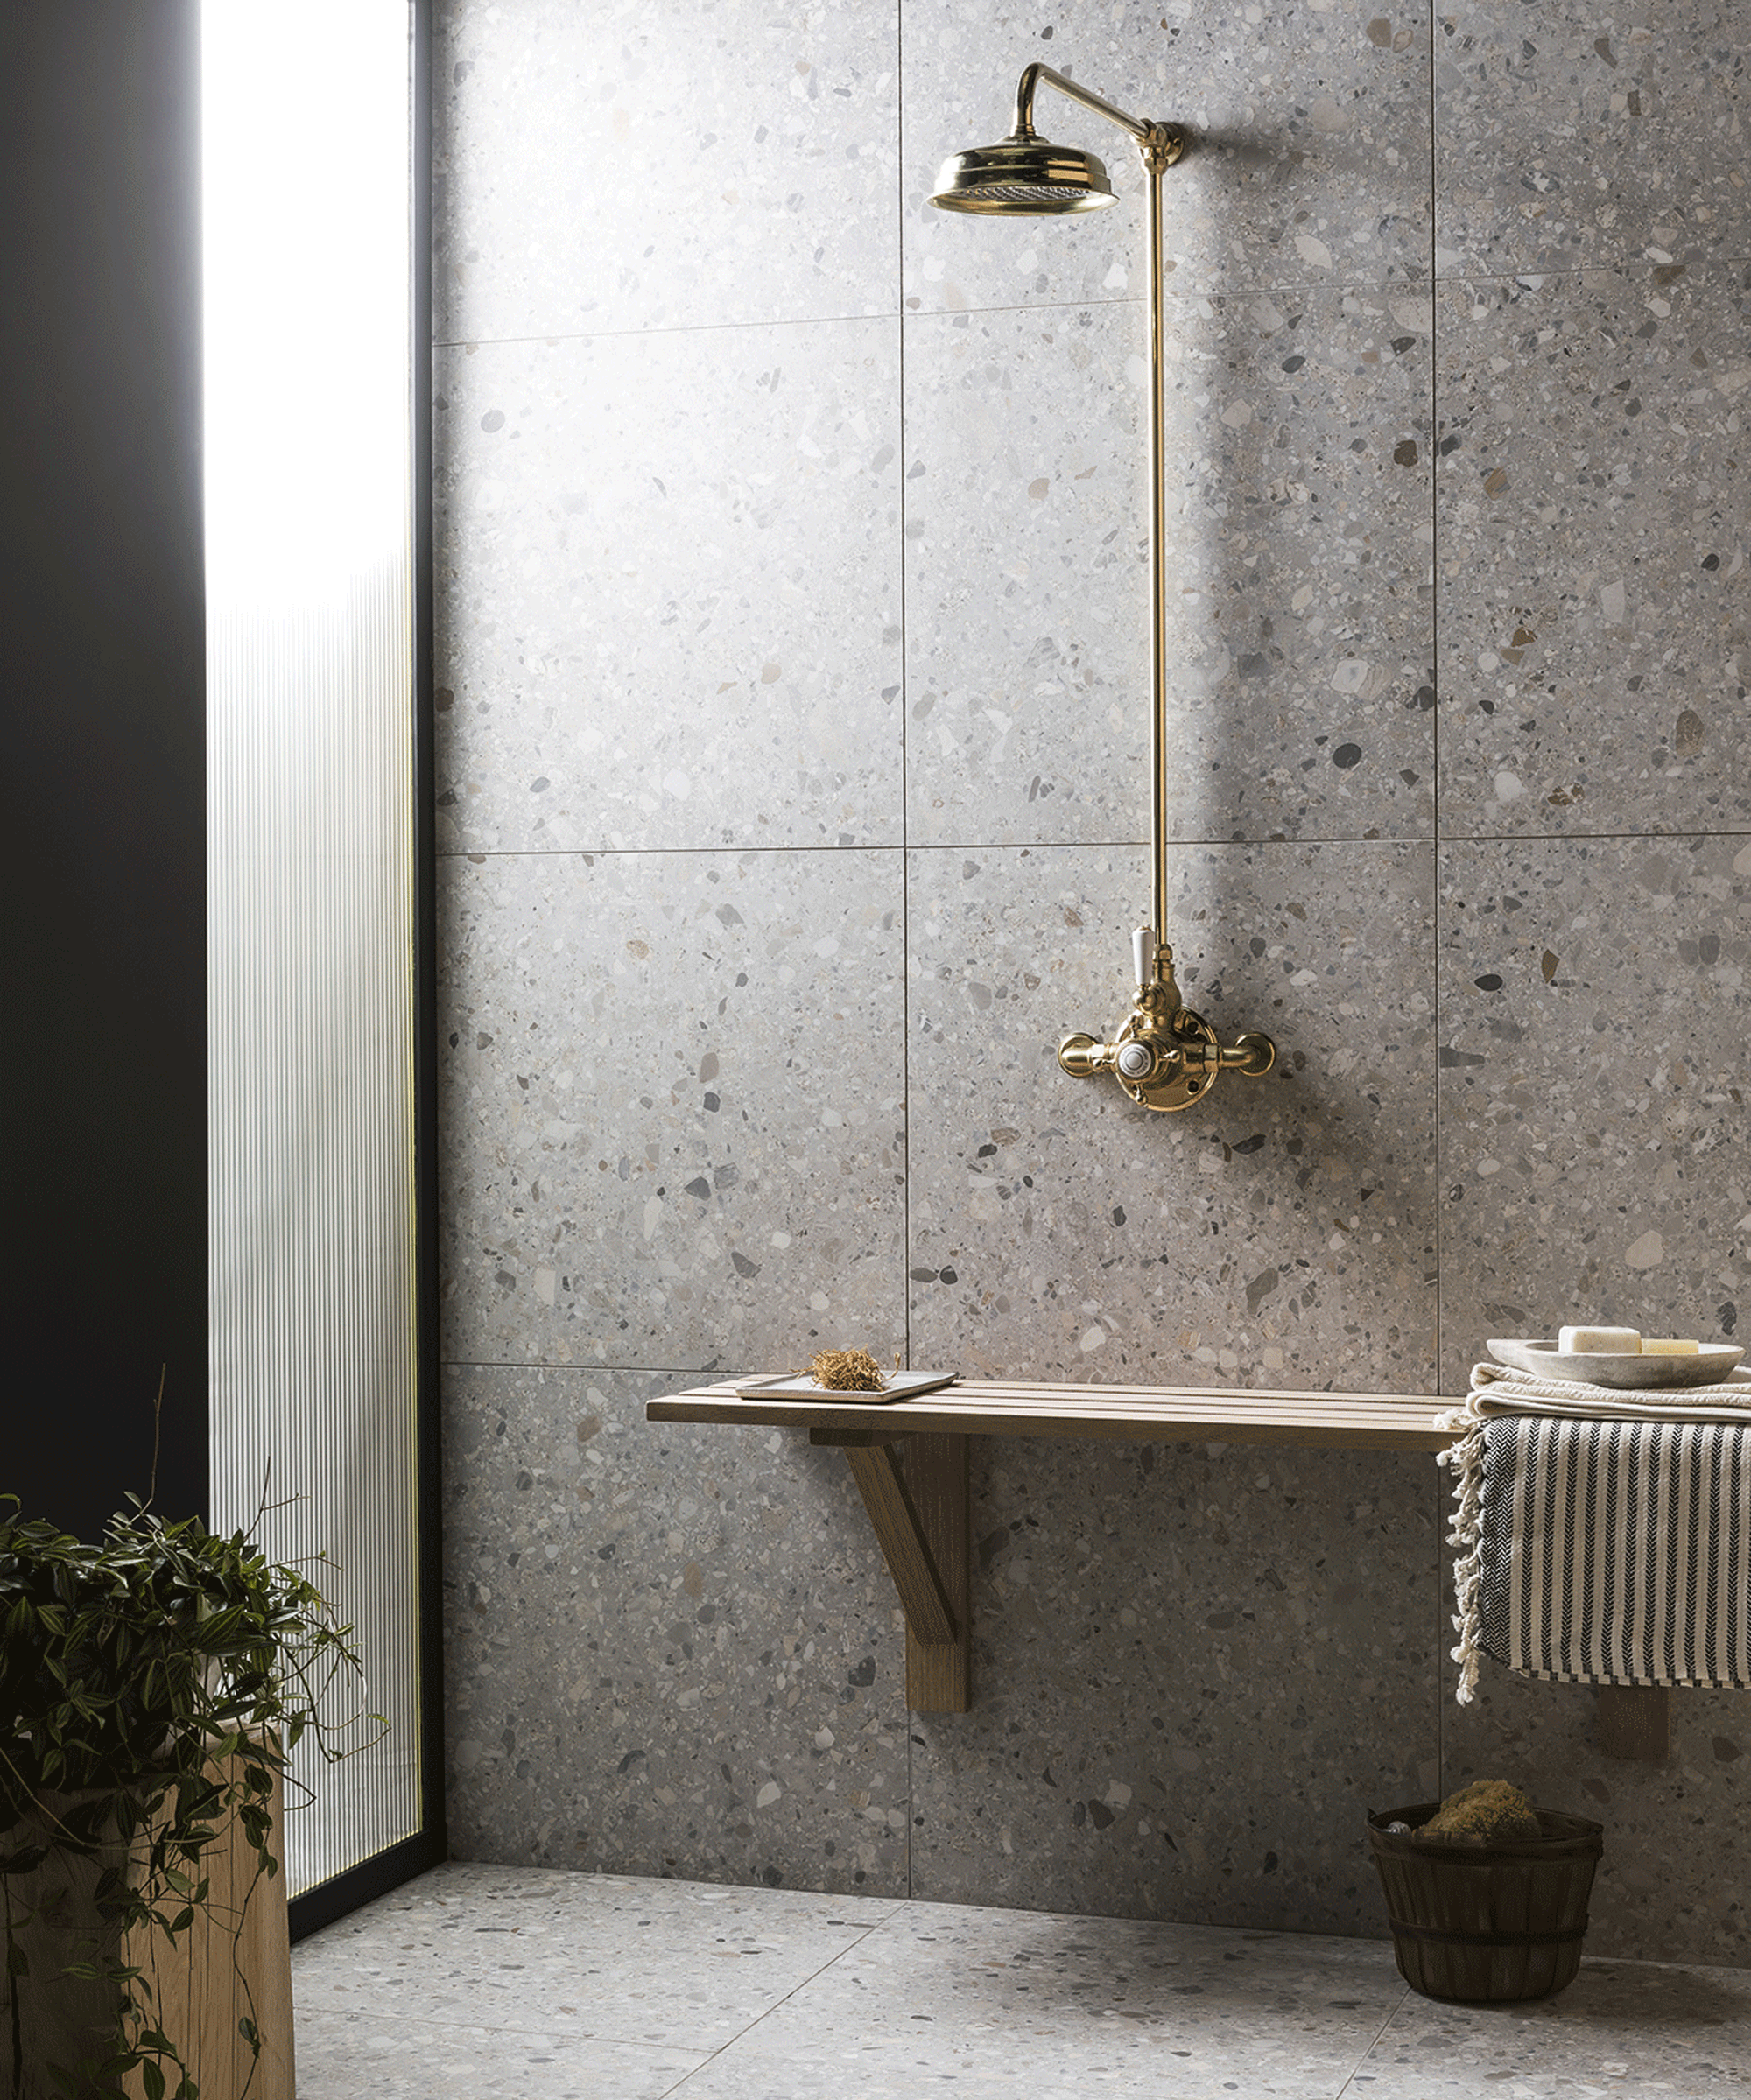 Wet room with minimal design, gold effect shower, wooden bench, floor and wall tiles